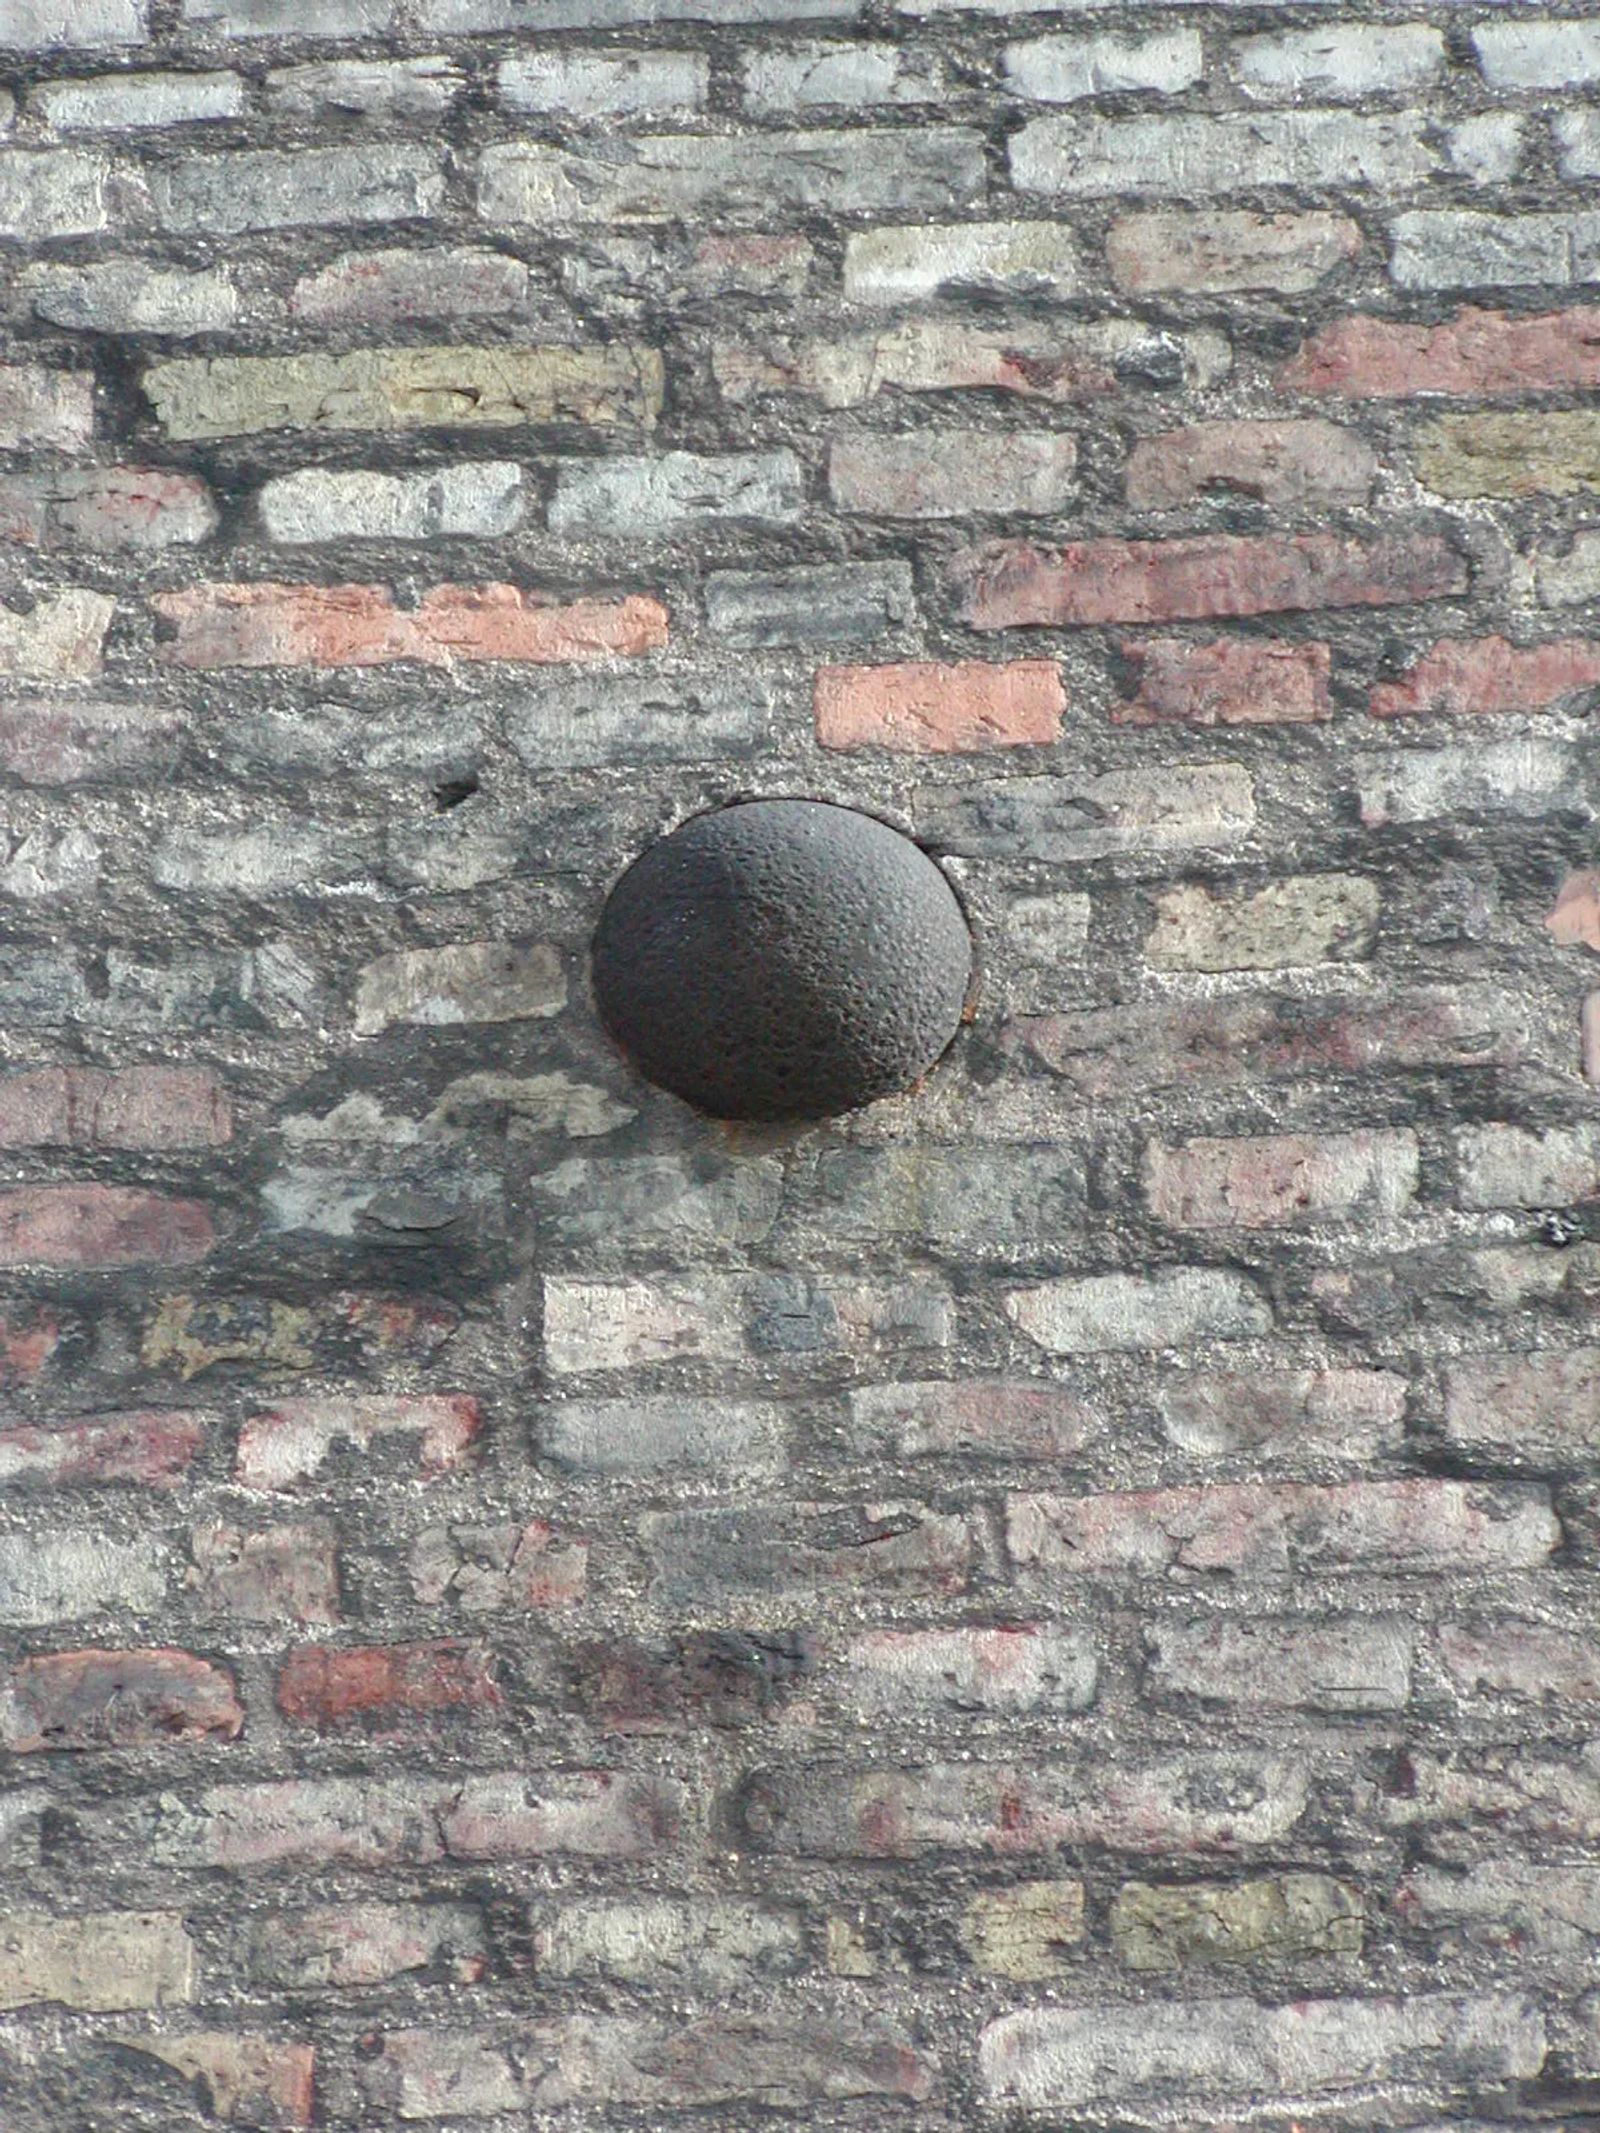 Photo of Cannonball lodged in the wall of a building in Copenhagen, Denmark